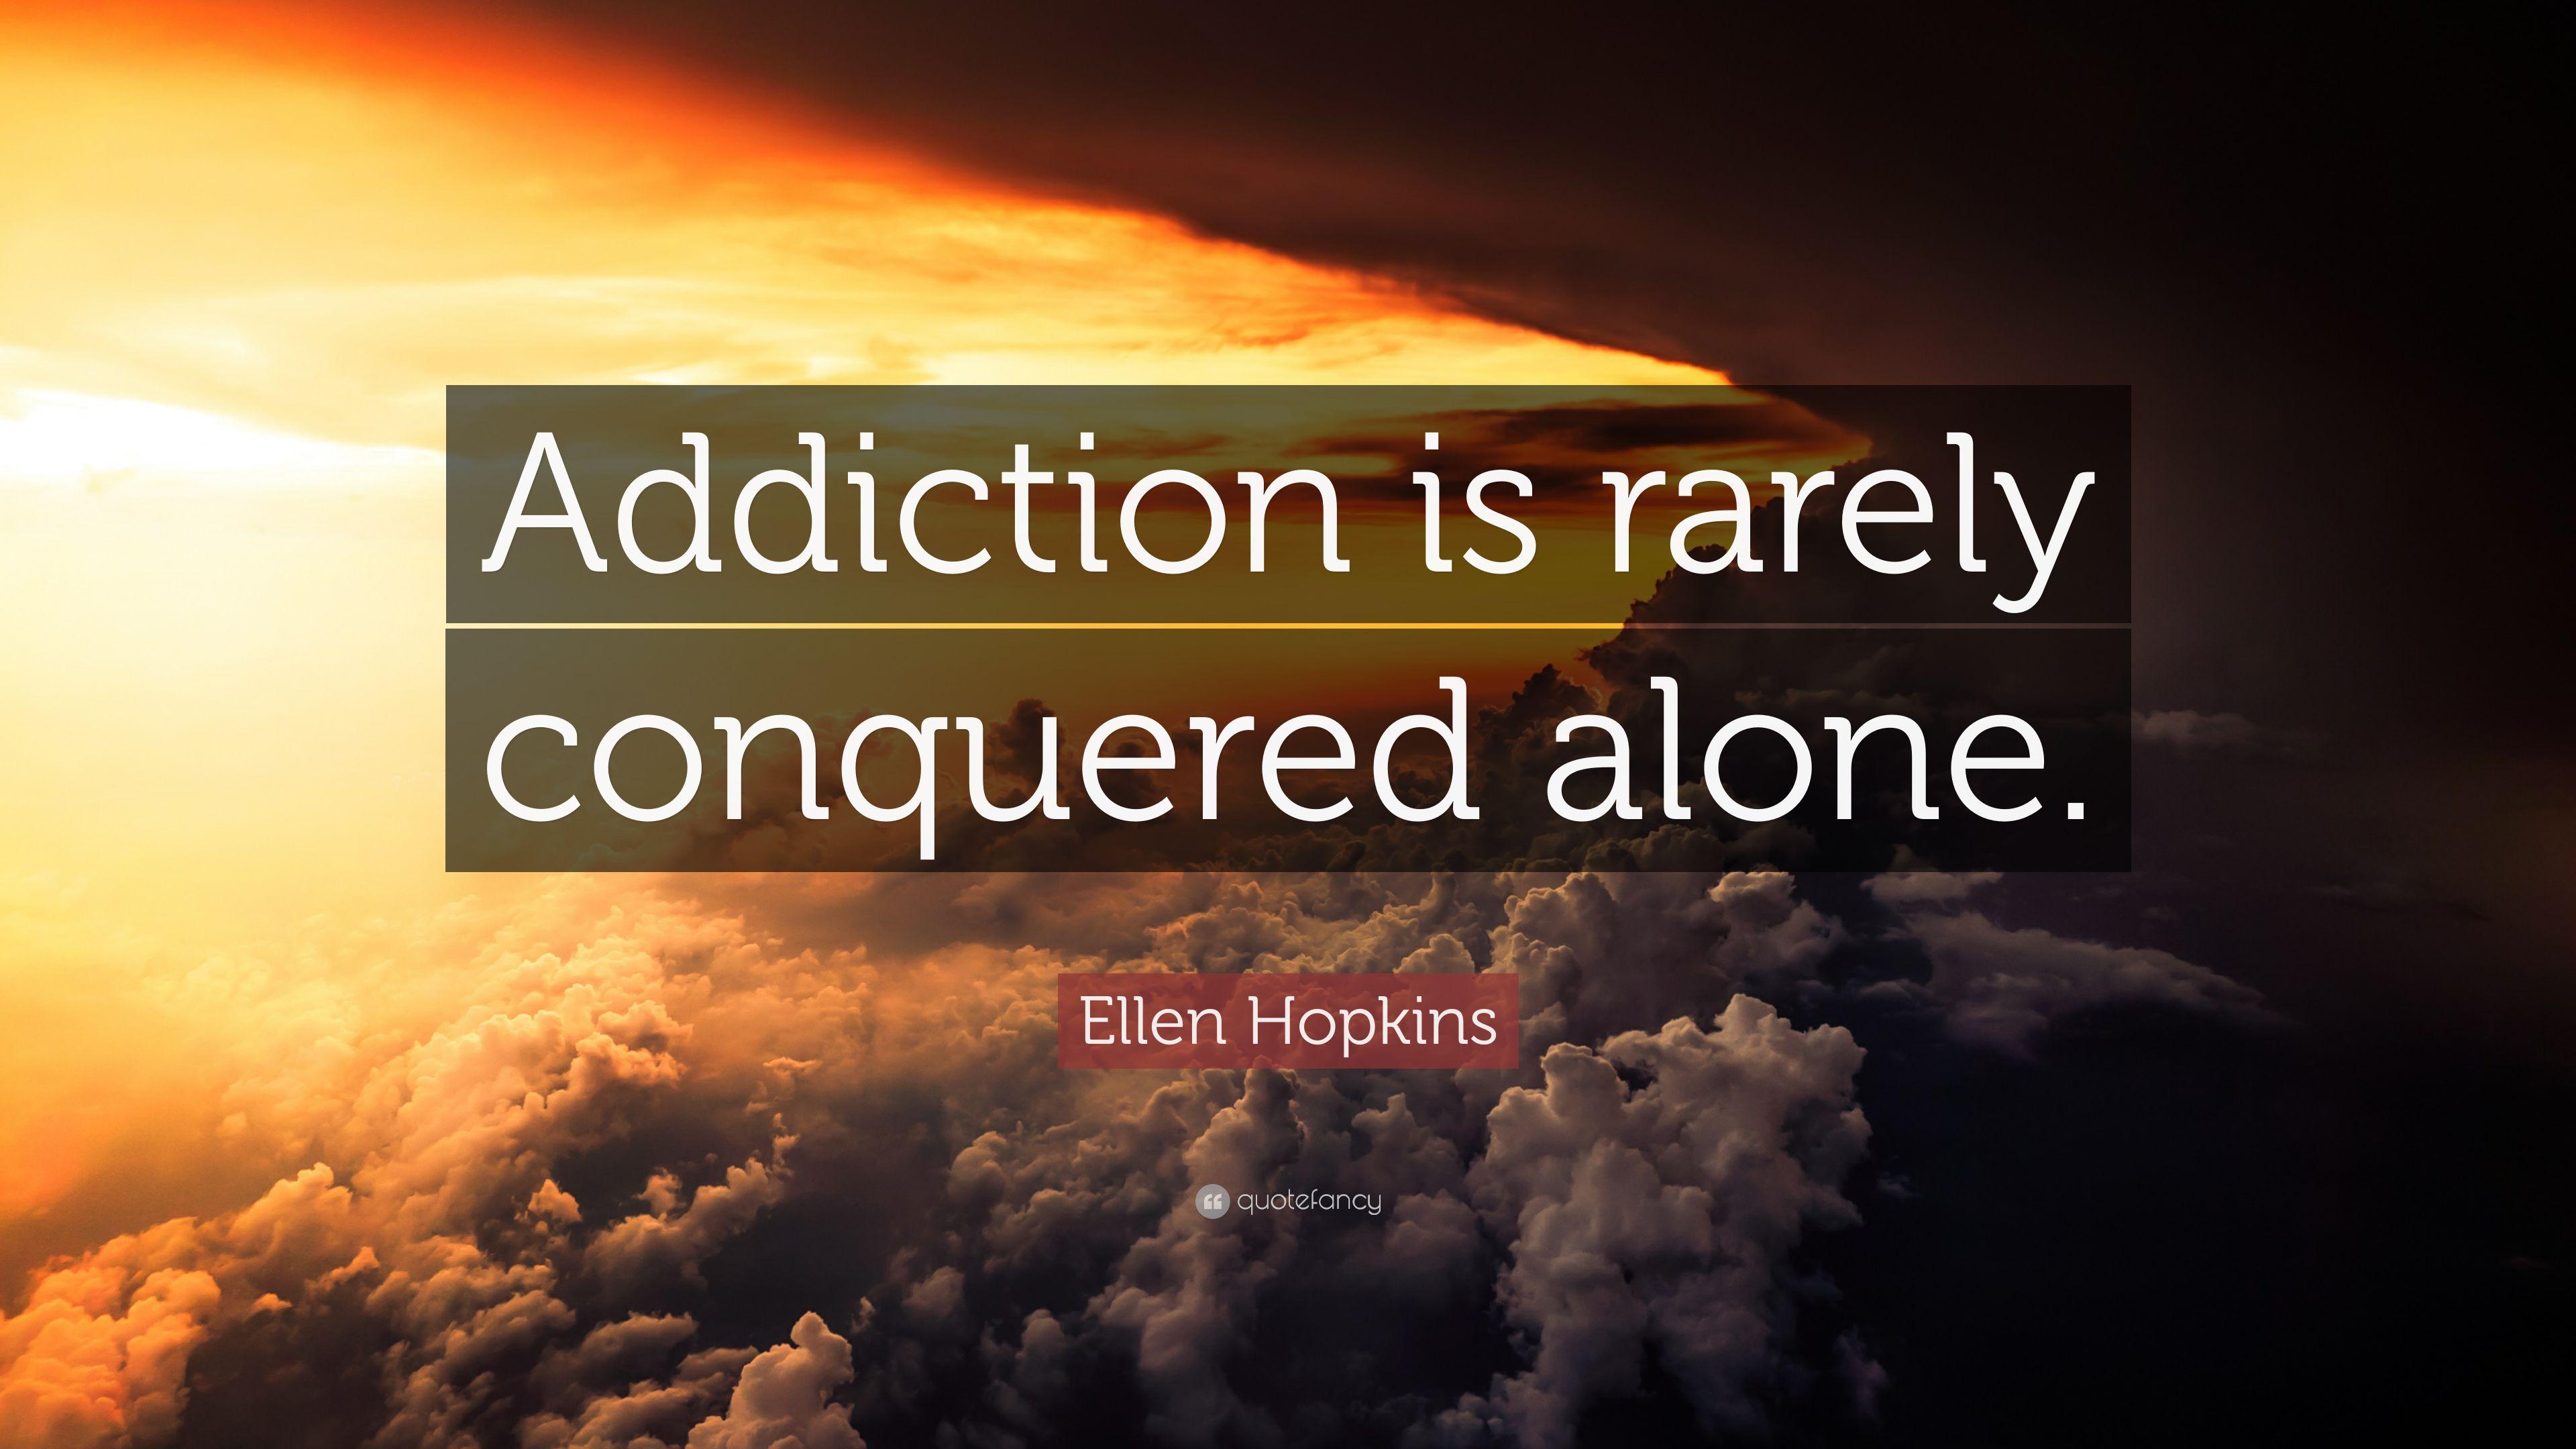 Ellen Hopkins Quote: “Addiction is rarely conquered alone.” 7